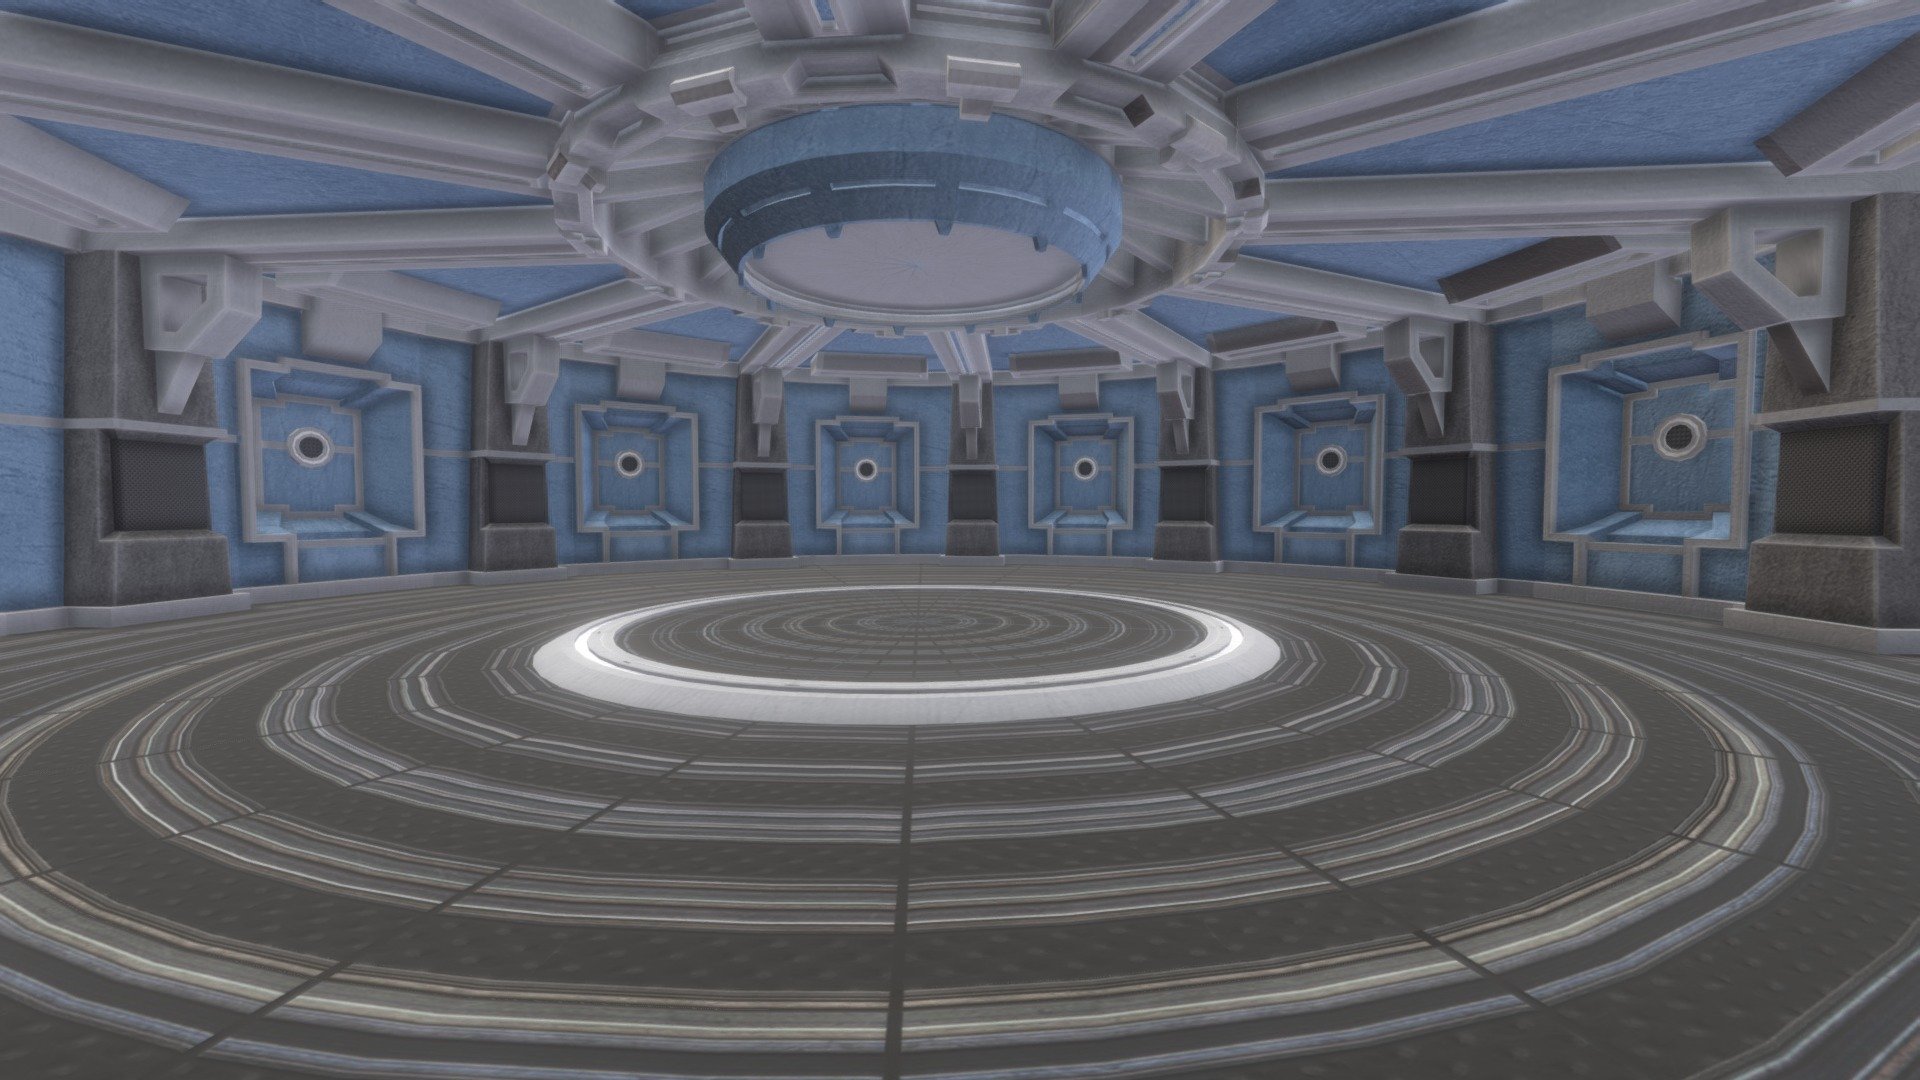 Low Poly Animated Sci-Fi Circular Room with moving platform in the center.  Optimized with Color, Metallic, and Normal Map for real-time engine use 3d model